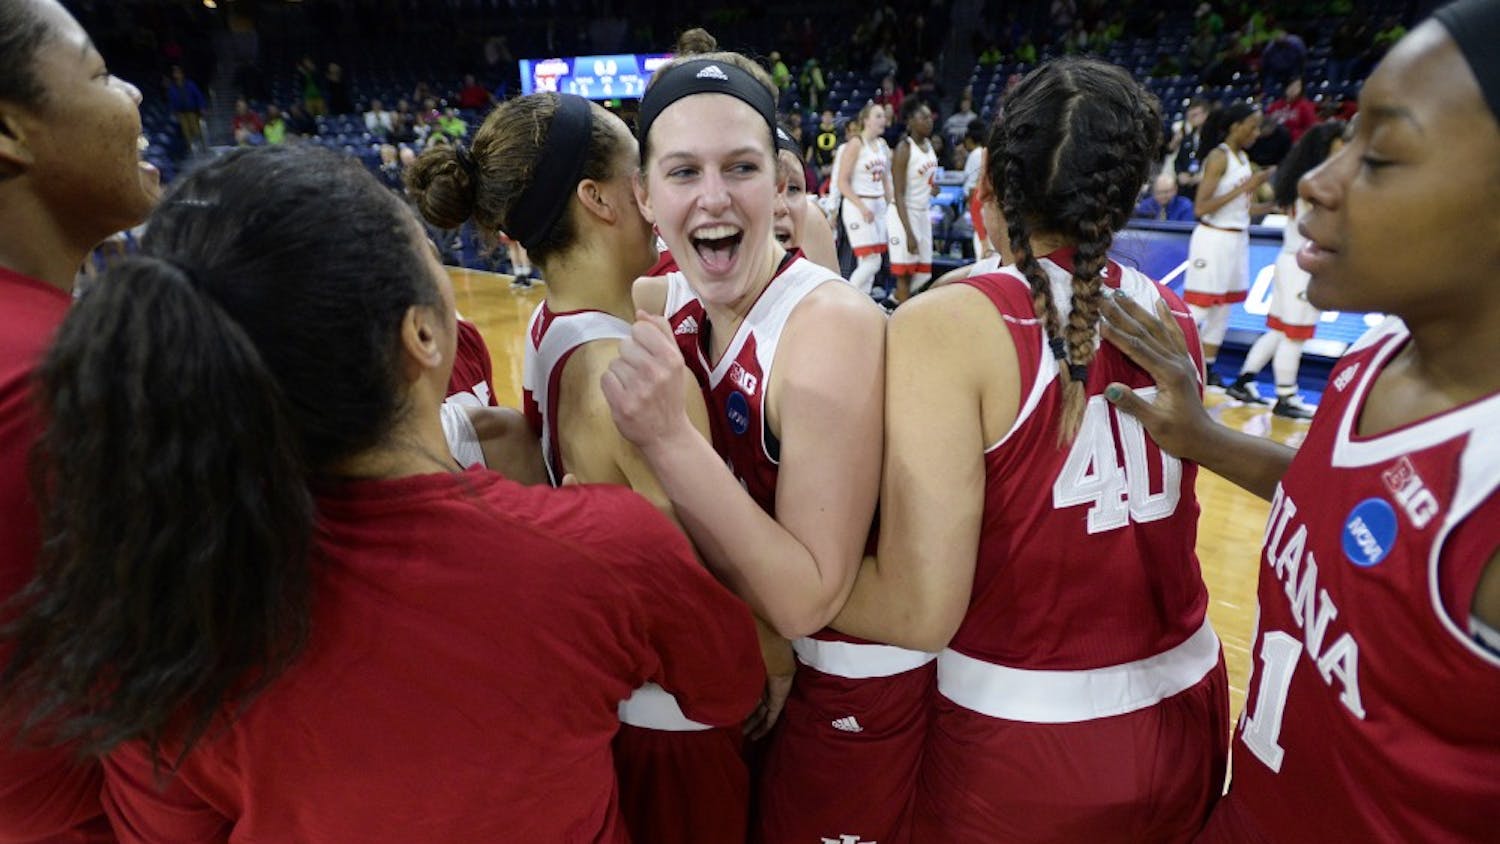 Junior guard Alexis Gassion hugs sophomore forward Amanda Cahill after beating Georgia 62-58 Saturday at Notre Dame. This was IU’s first NCAA tournament appearance since 2002. They will play Notre Dame on Monday.